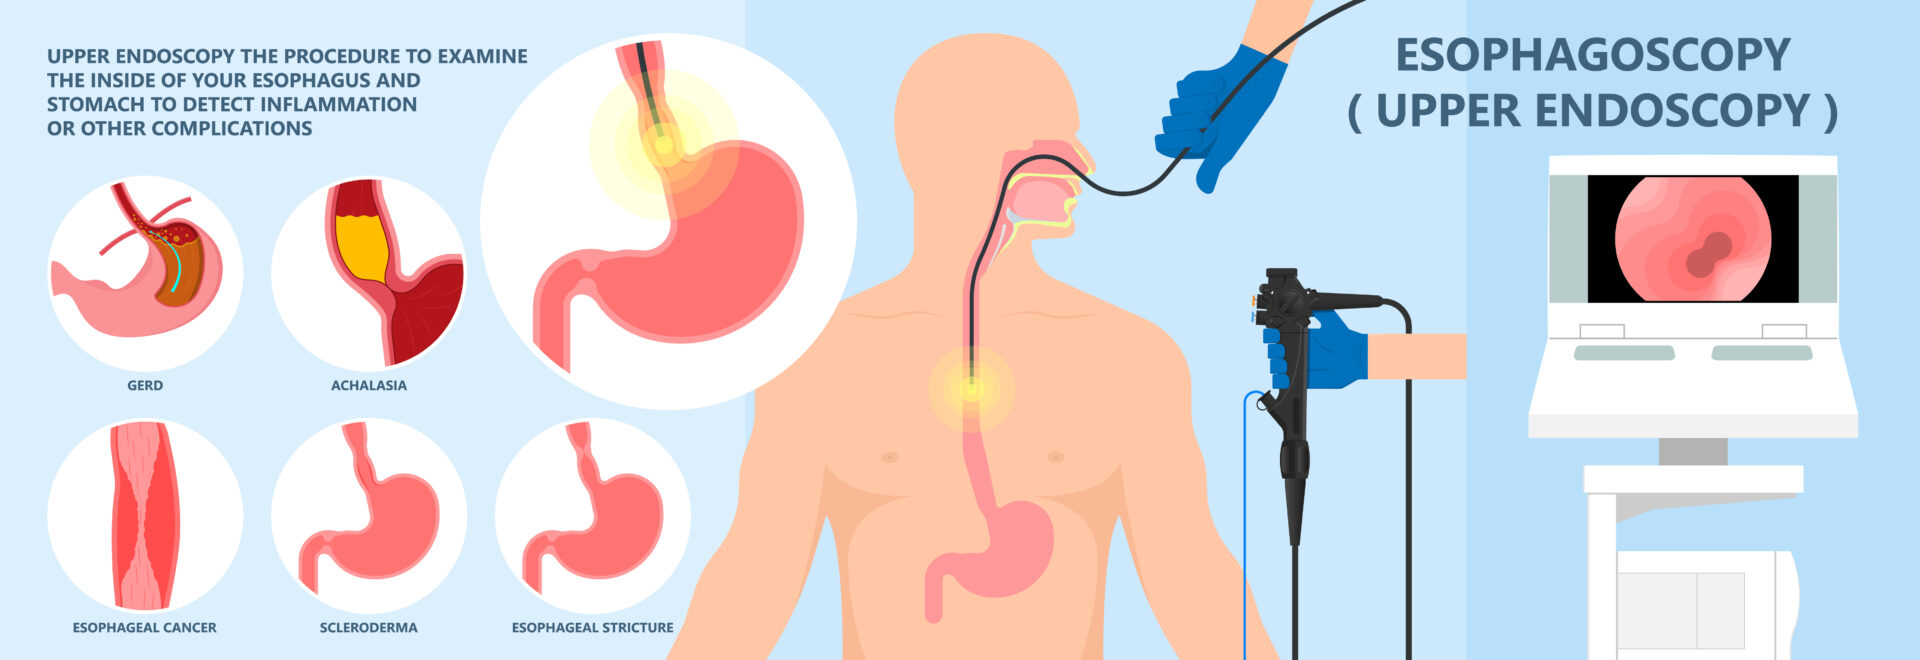 Endoscopy is performed by inserting a lighting tube also called Endoscope into the esophagus